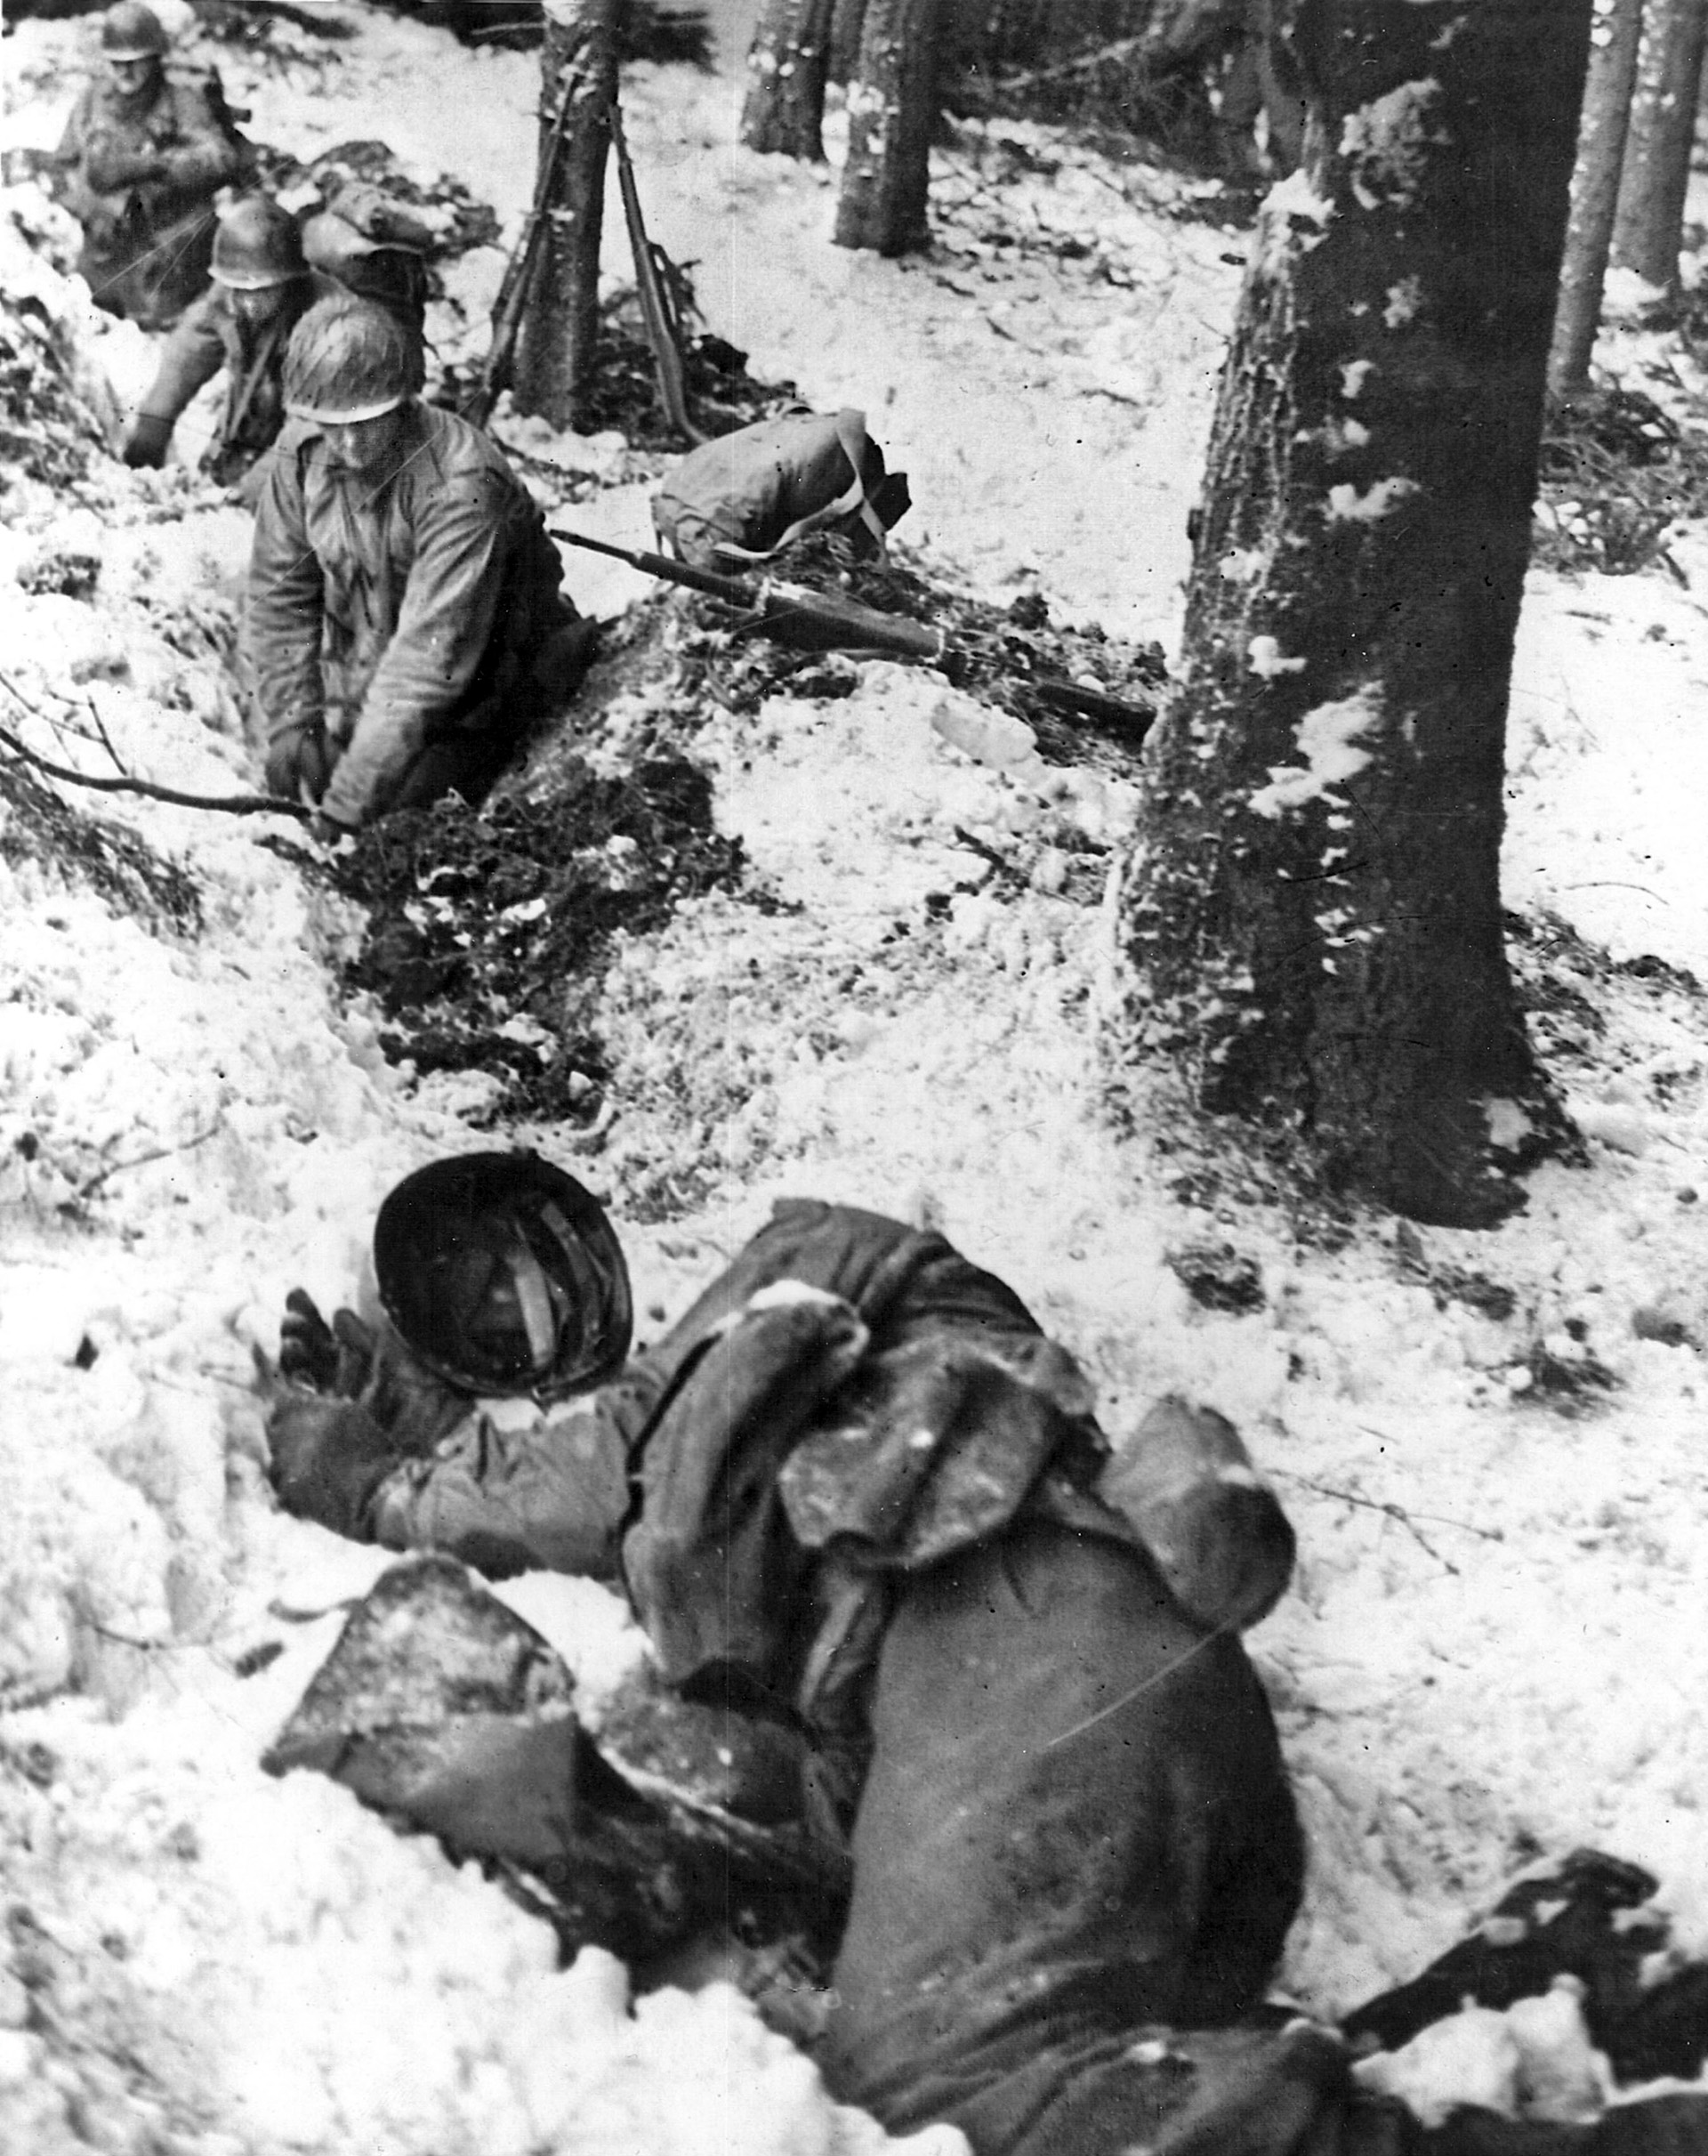 Despite the frigid cold and frozen ground, men of the 28th Infantry Division’s 110th Infantry Division hurriedly dig fighting positions in a ditch along a road in anticipation of an enemy attack.